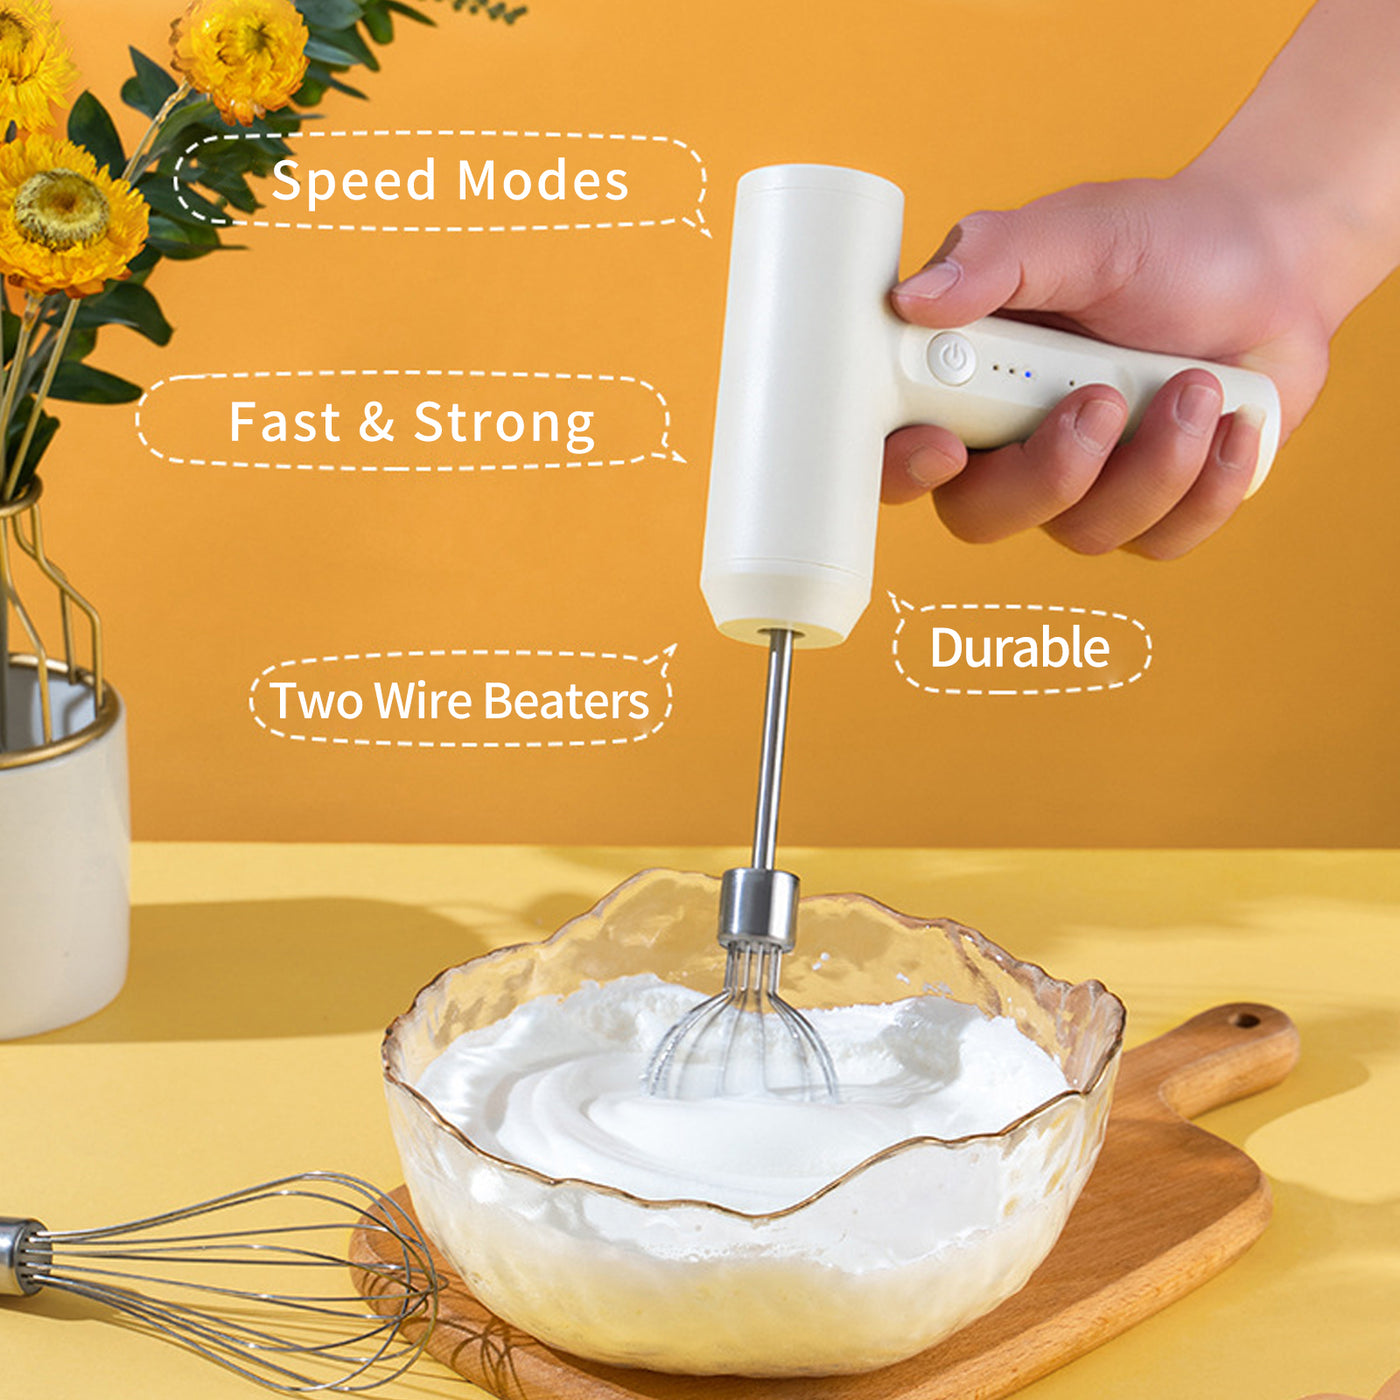 Electric Egg Beater With 2 Wire Beaters Portable Food Blender Whisk 3 Speeds Handheld Food Mixer ,USB Rechargeable Handheld Egg Beater - White - Compact Blenders - Carvan Mart